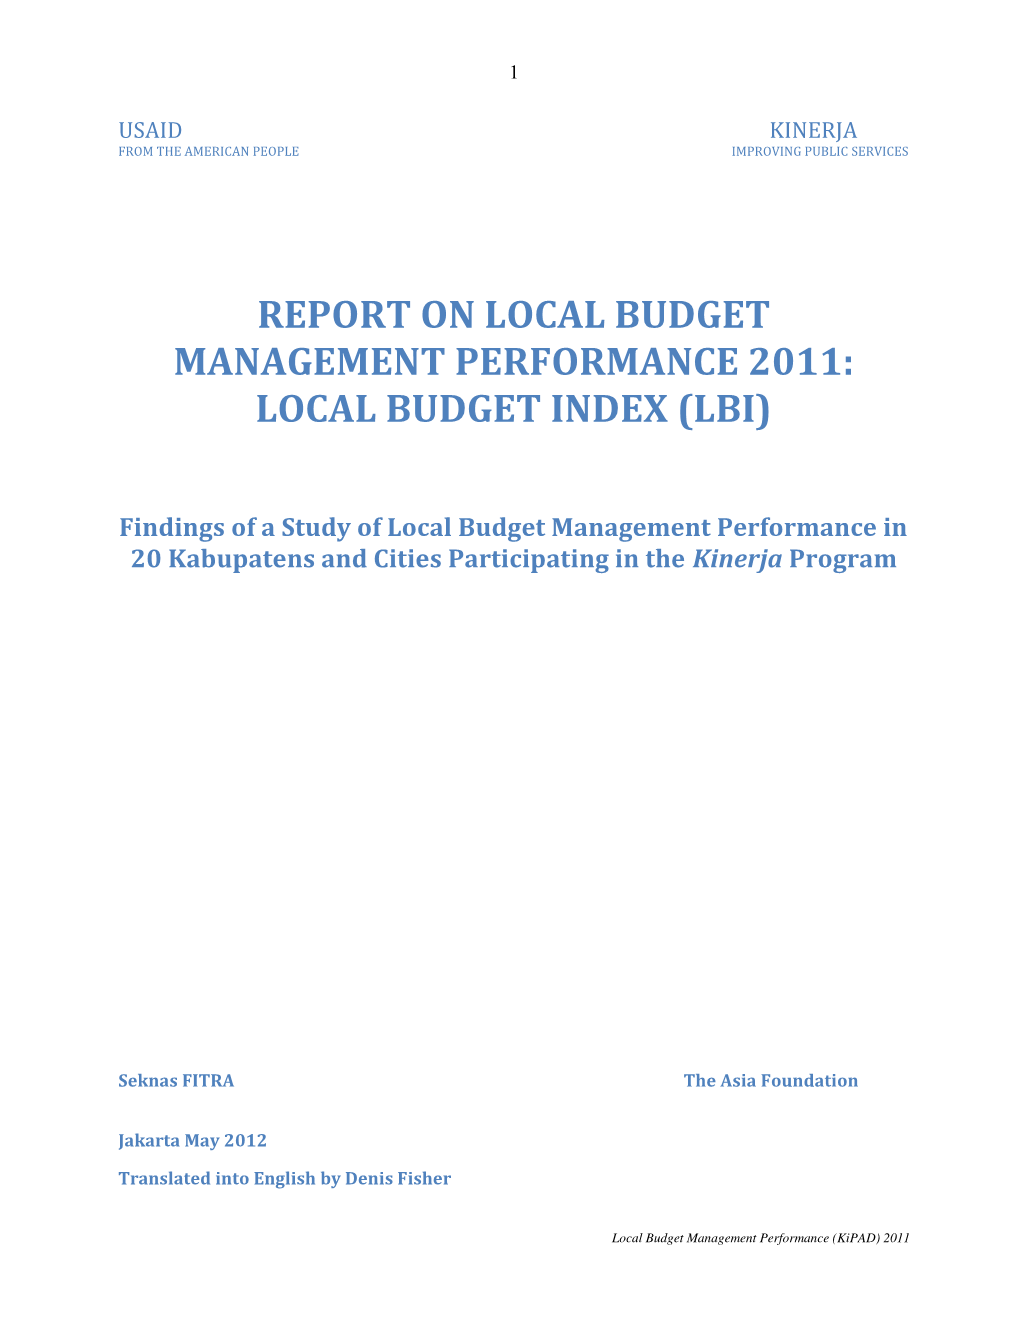 Report on Local Budget Management Performance 2011: Local Budget Index (Lbi)